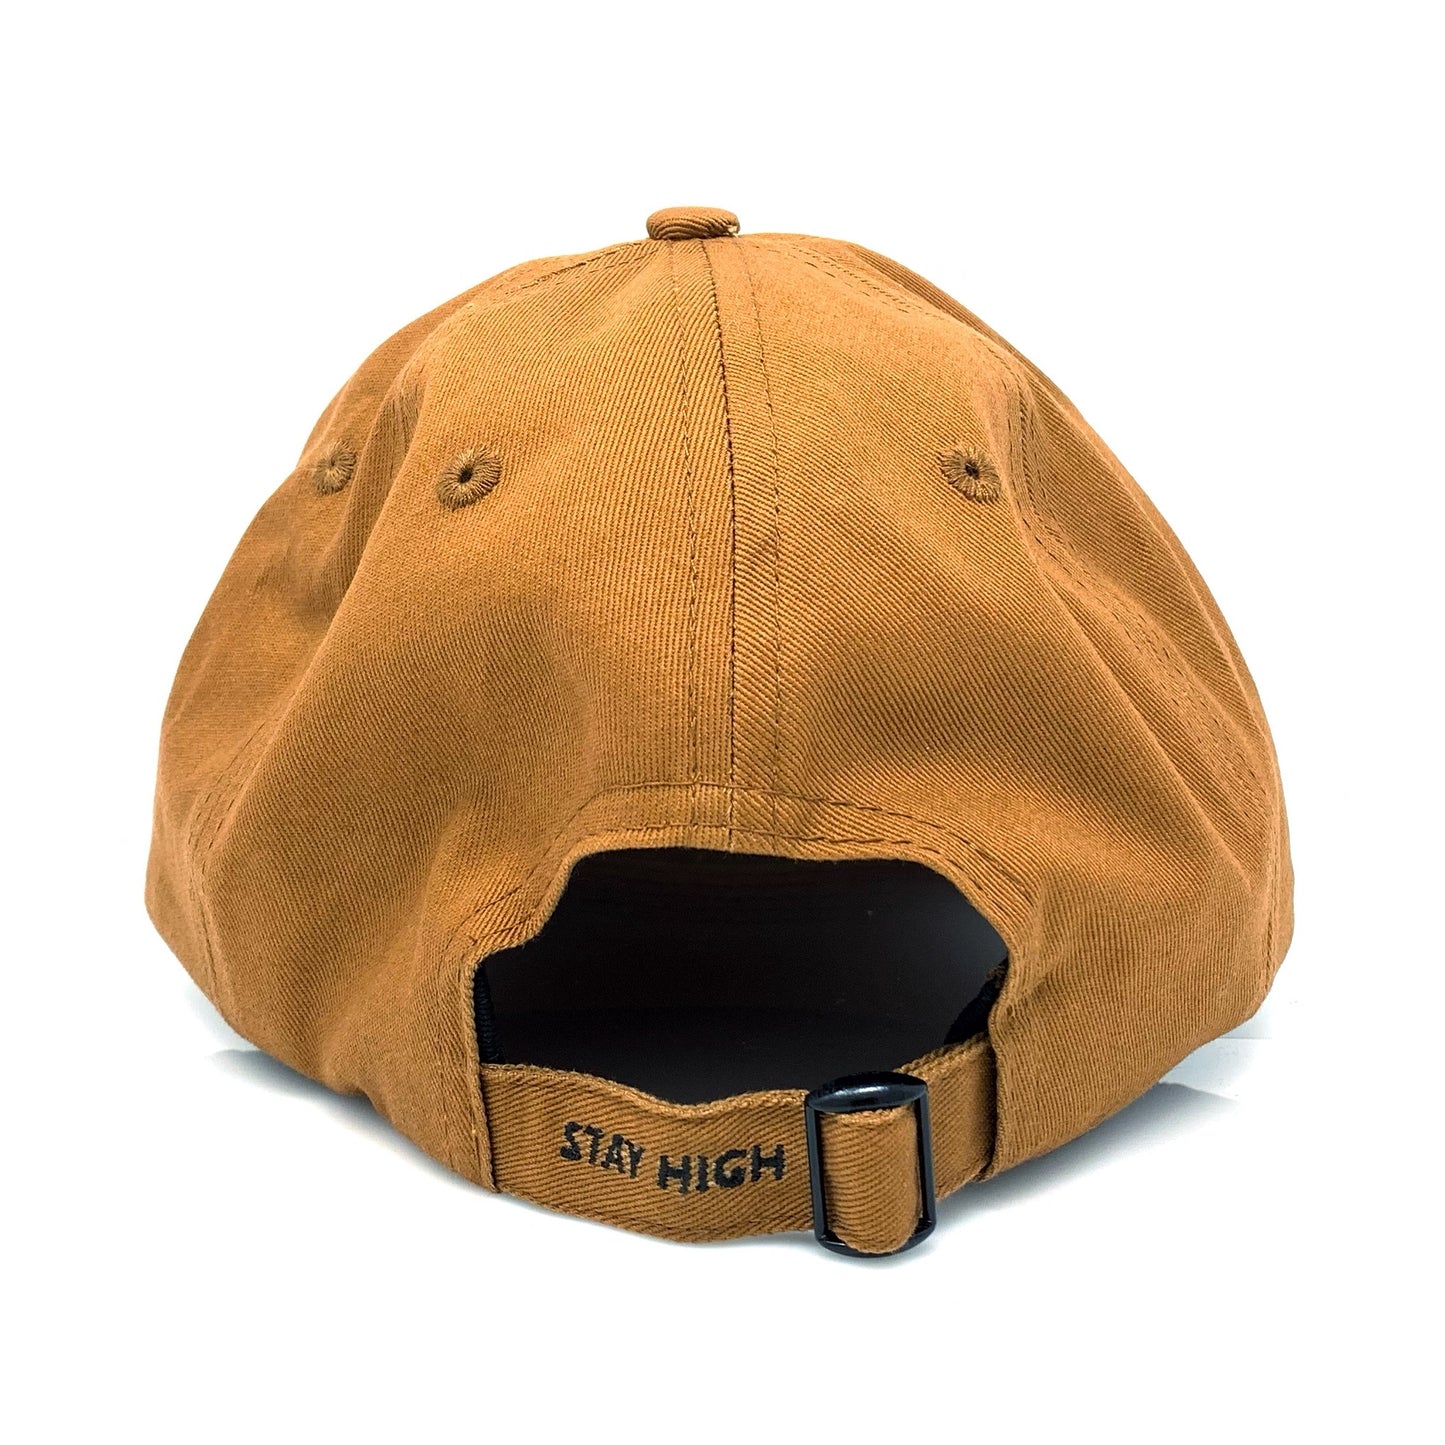 Stay High Hat